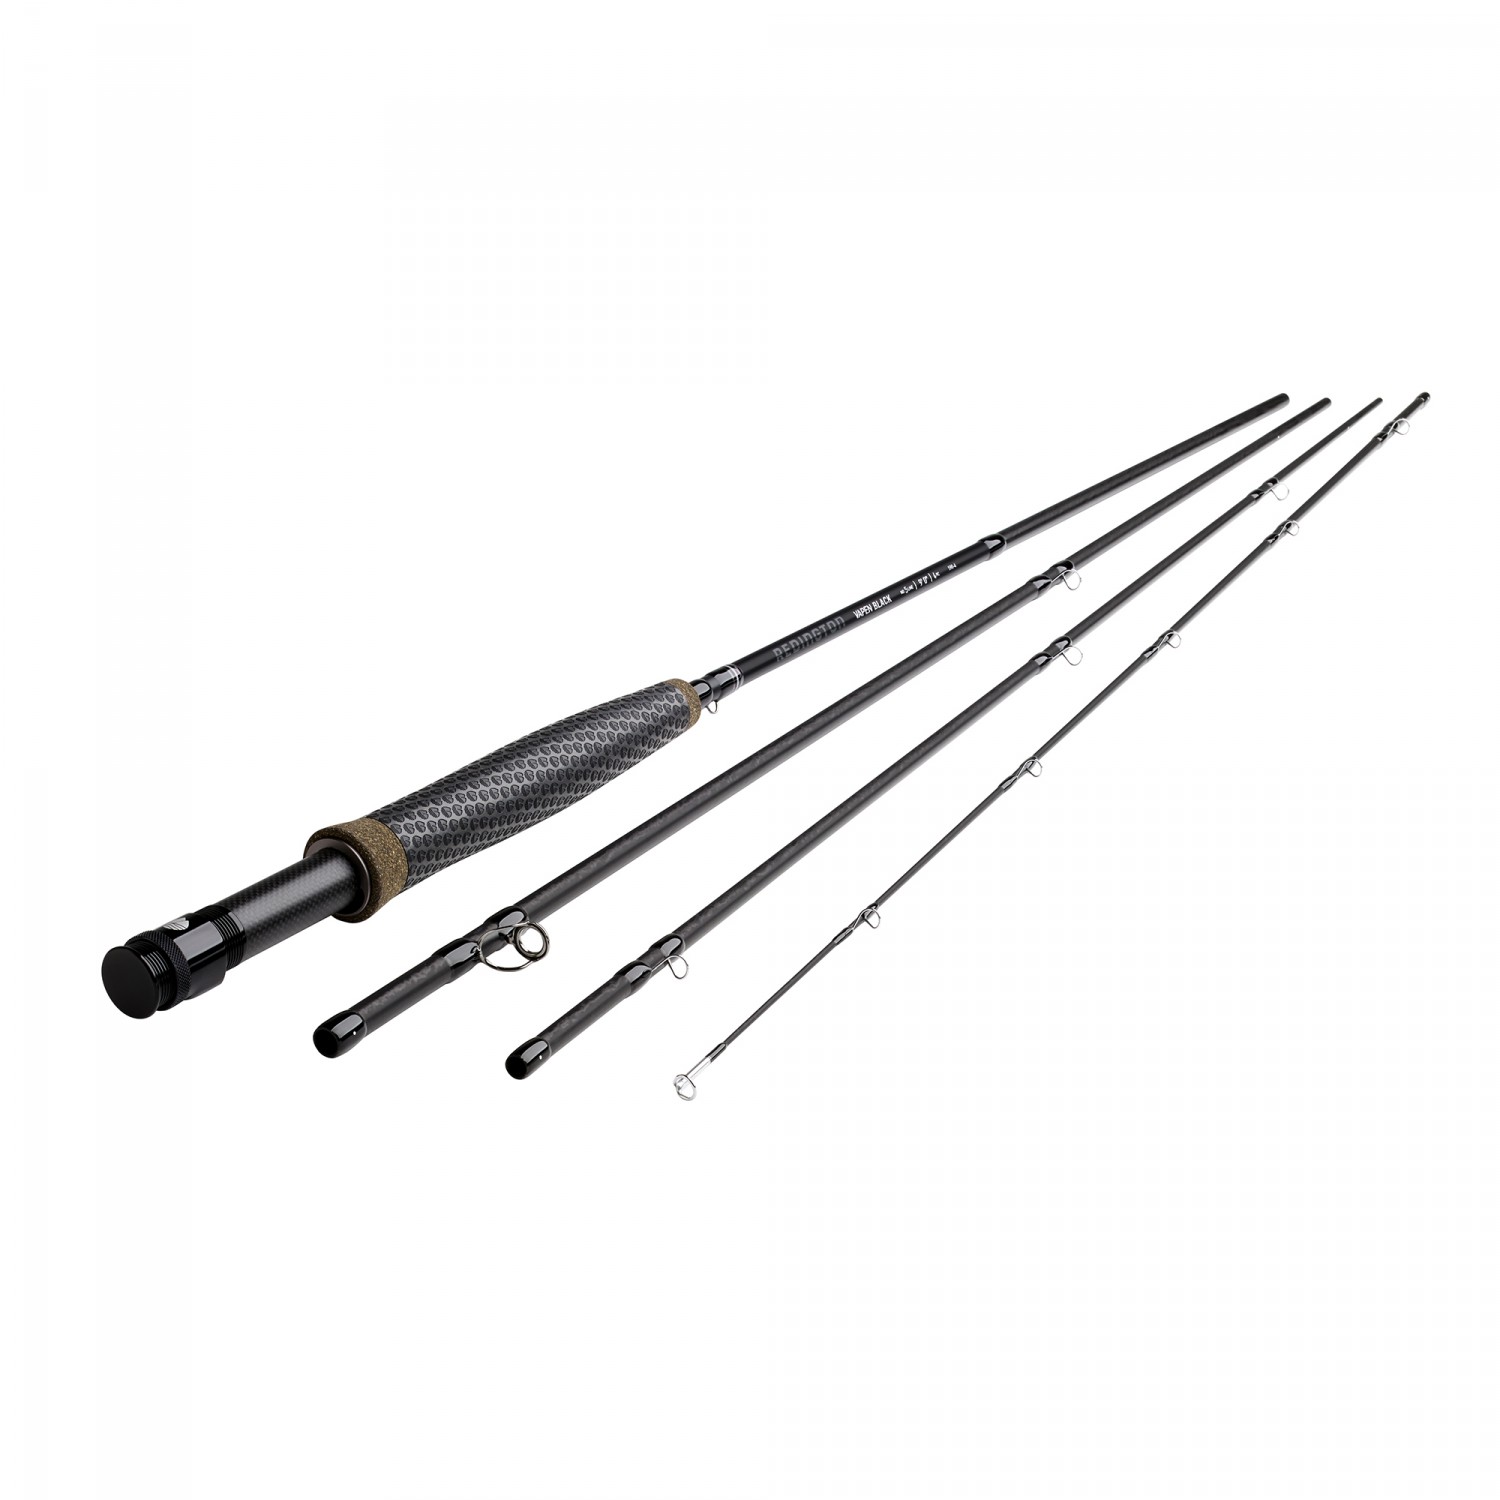 Product Review Redington Vapen Black Fly Rod - Sweetwater Fly Shop